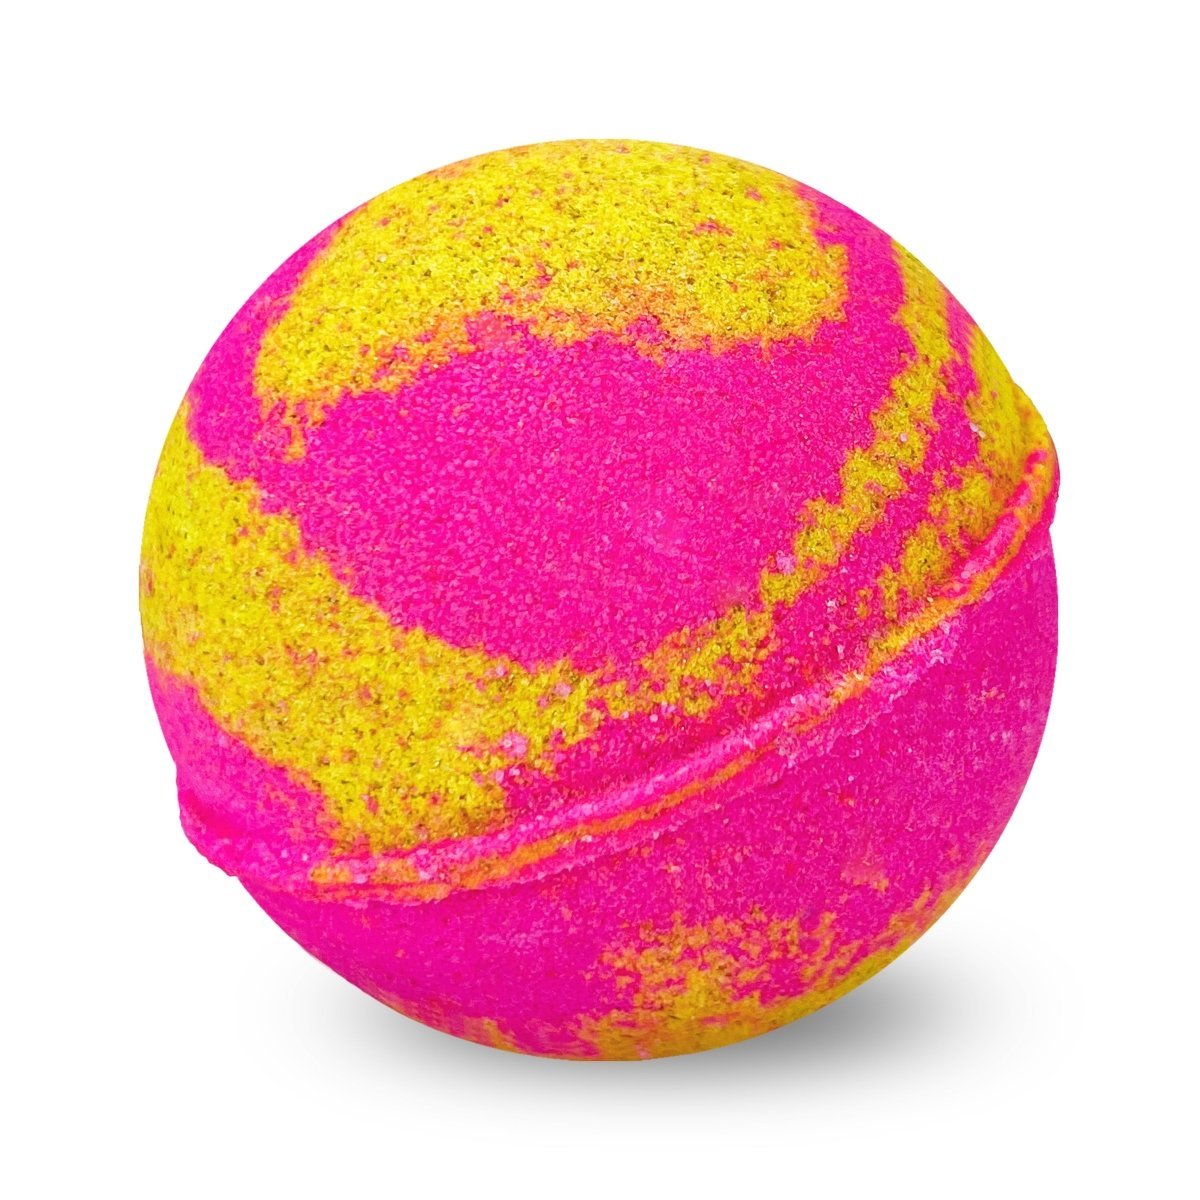 Coffee Snob Bath Bomb for Kids & Adults - Large & Colourful Coffee & Shea Butter Fragrance - Made in Australia by Bath Box